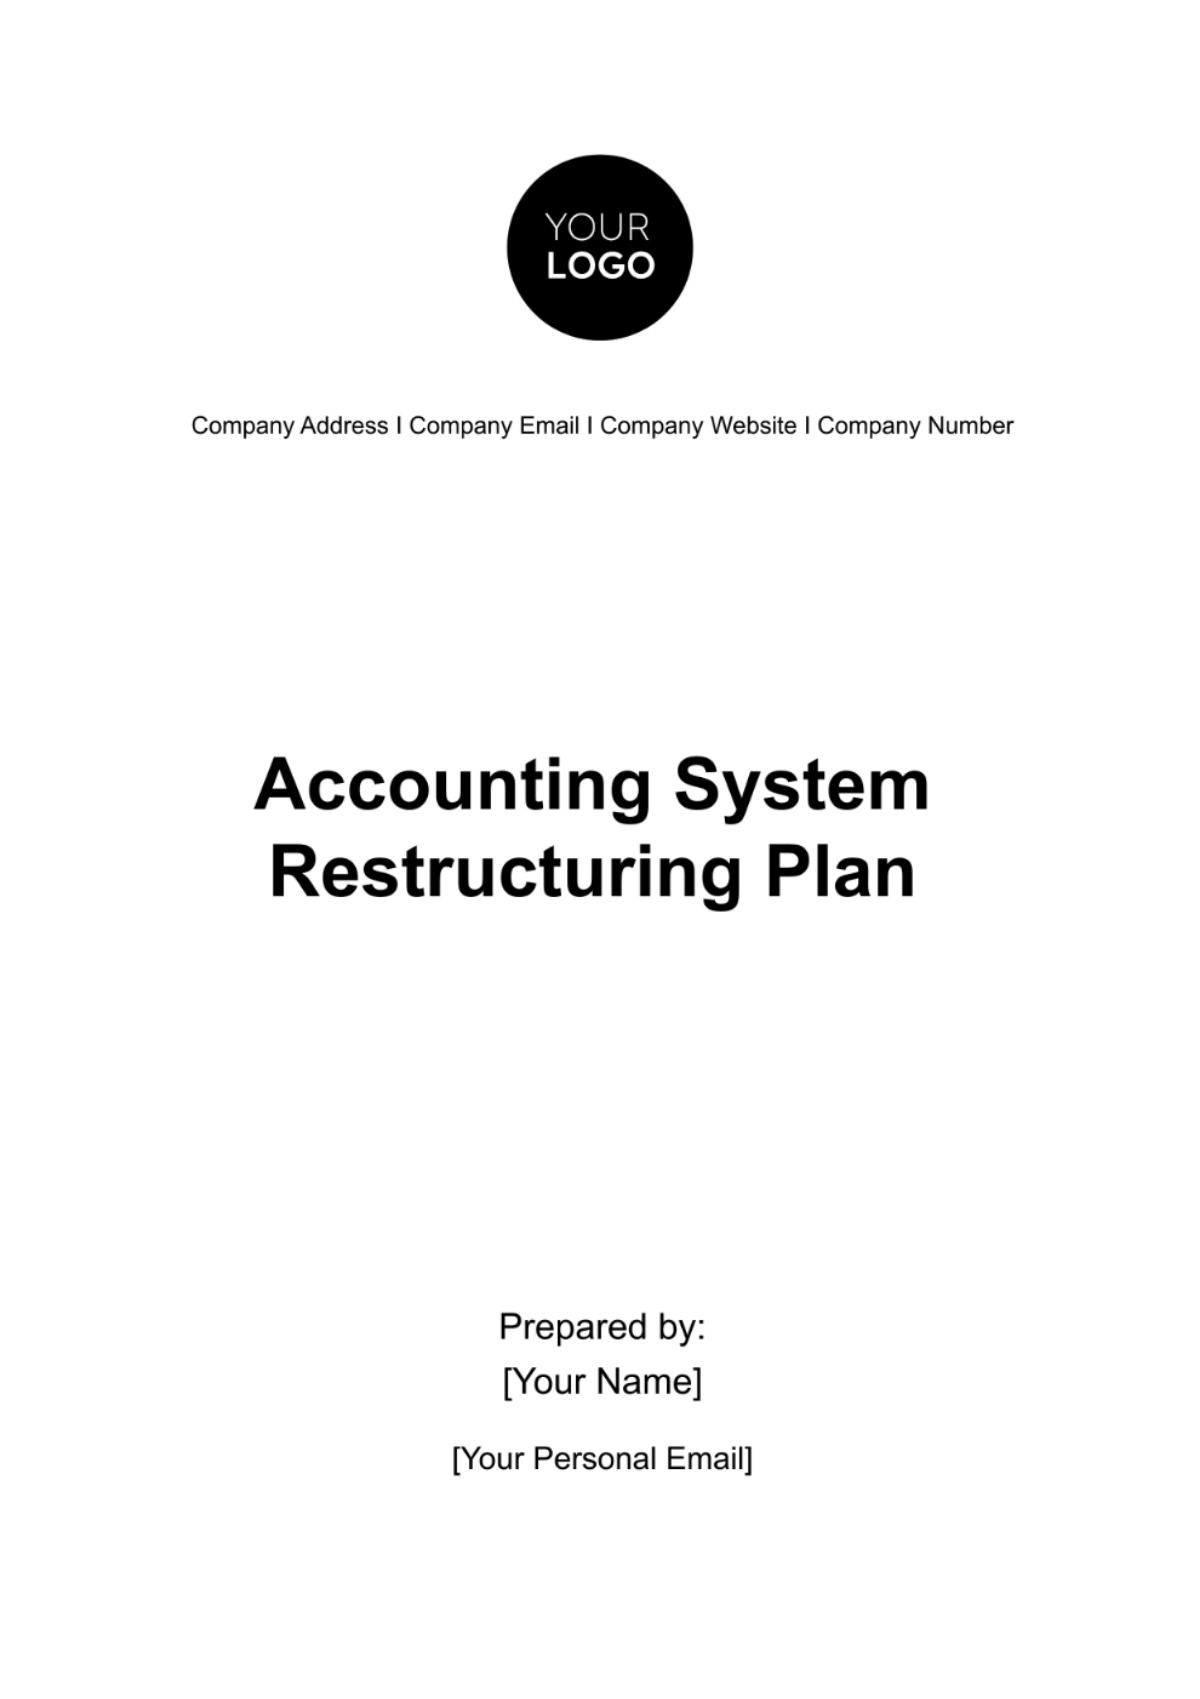 Accounting System Restructuring Plan Template